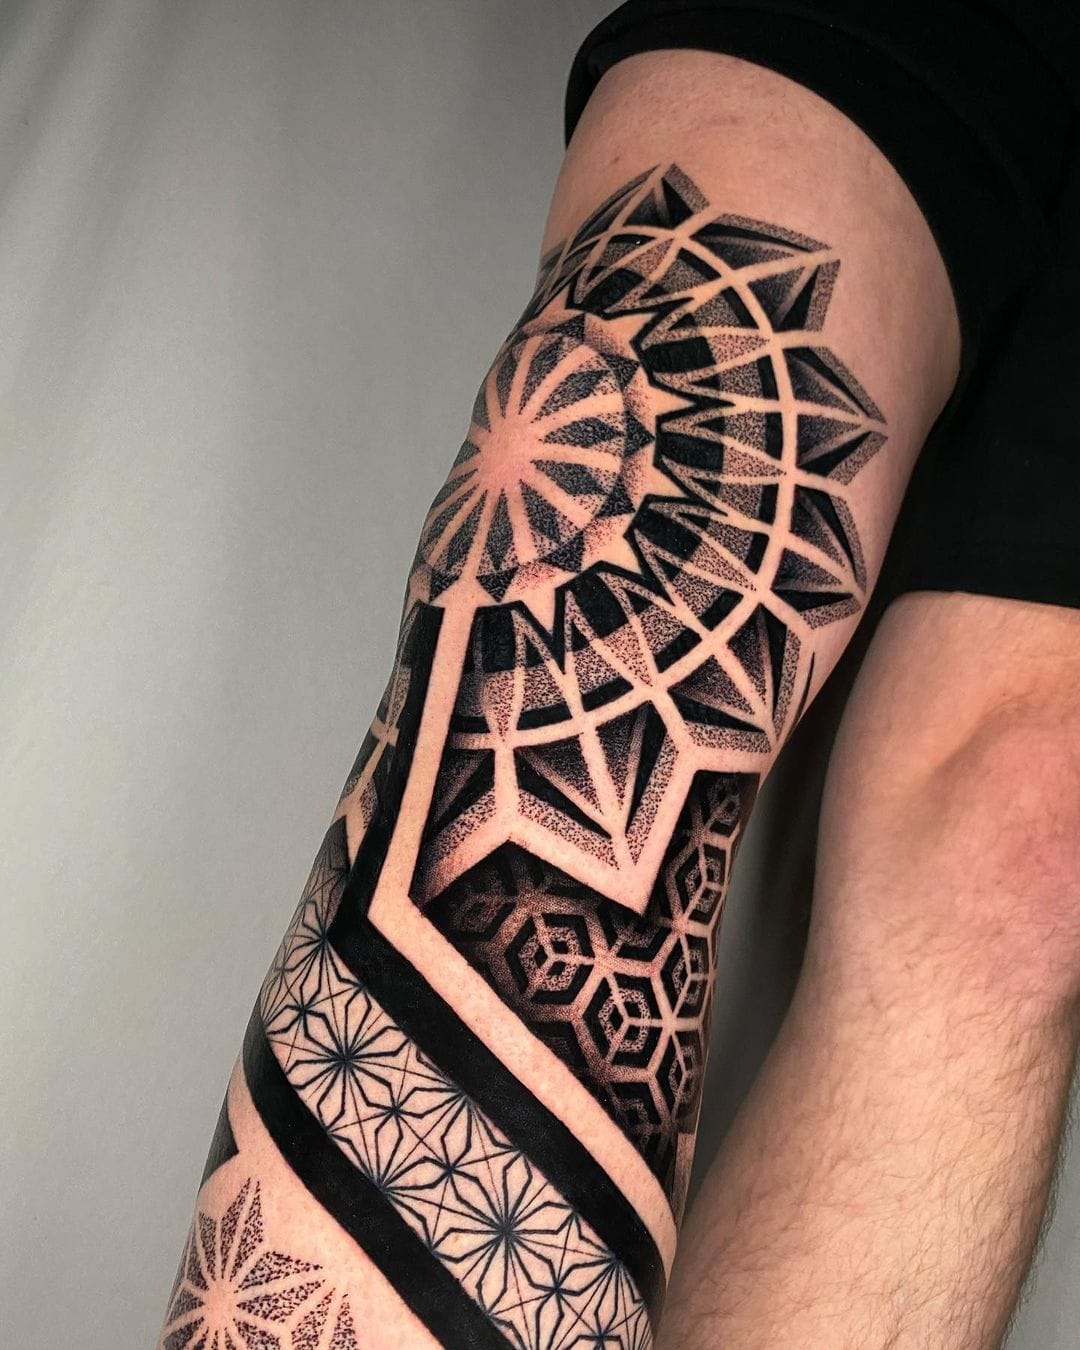 Mandala Henna Tattoo Knee | another one of my creative outle… | Flickr